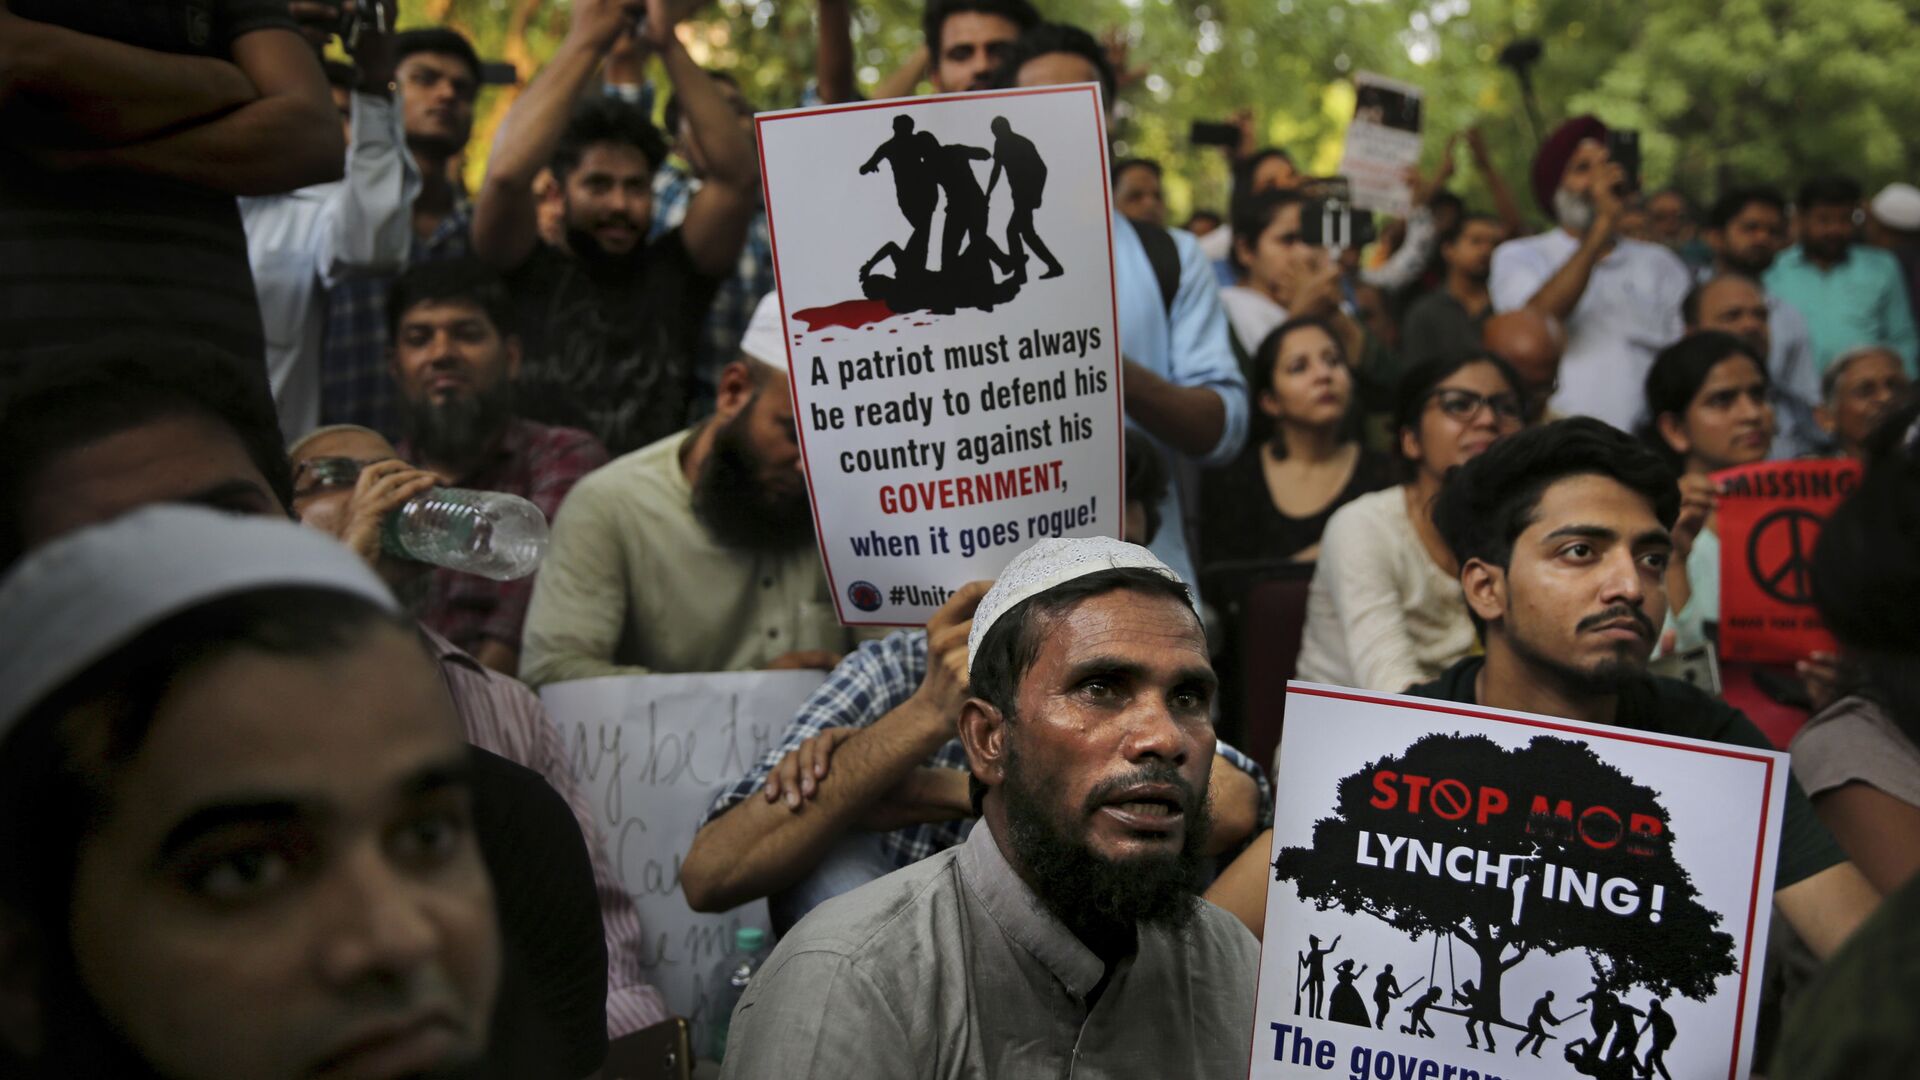 Indians hold placards condemning recent mob lynching of Muslim youth Tabrez Ansari in Jharkhand state as they listen to a speaker during a protest in New Delhi, India, Wednesday, June 26, 2019 - Sputnik International, 1920, 19.03.2021